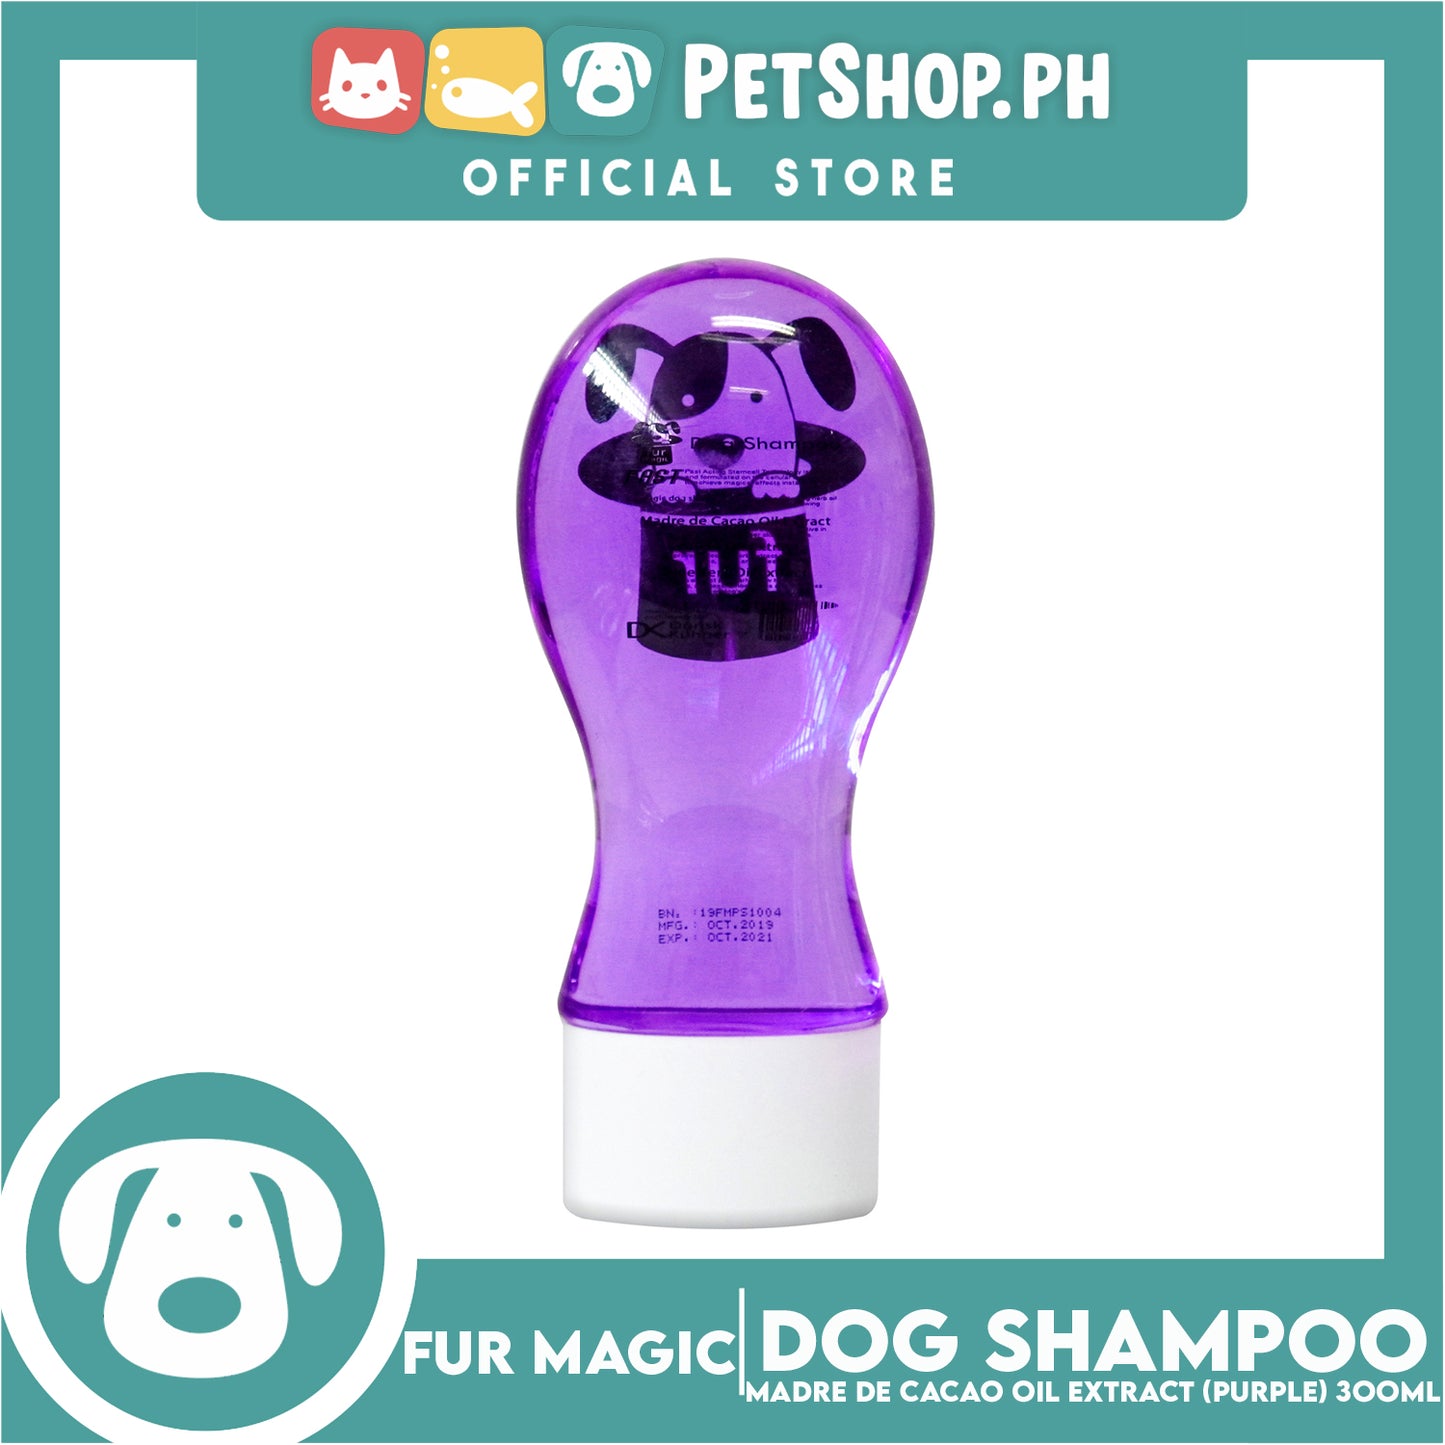 Fur magic with Fast Acting Stemcell Technology (Violet) 300ml Dog Shampoo